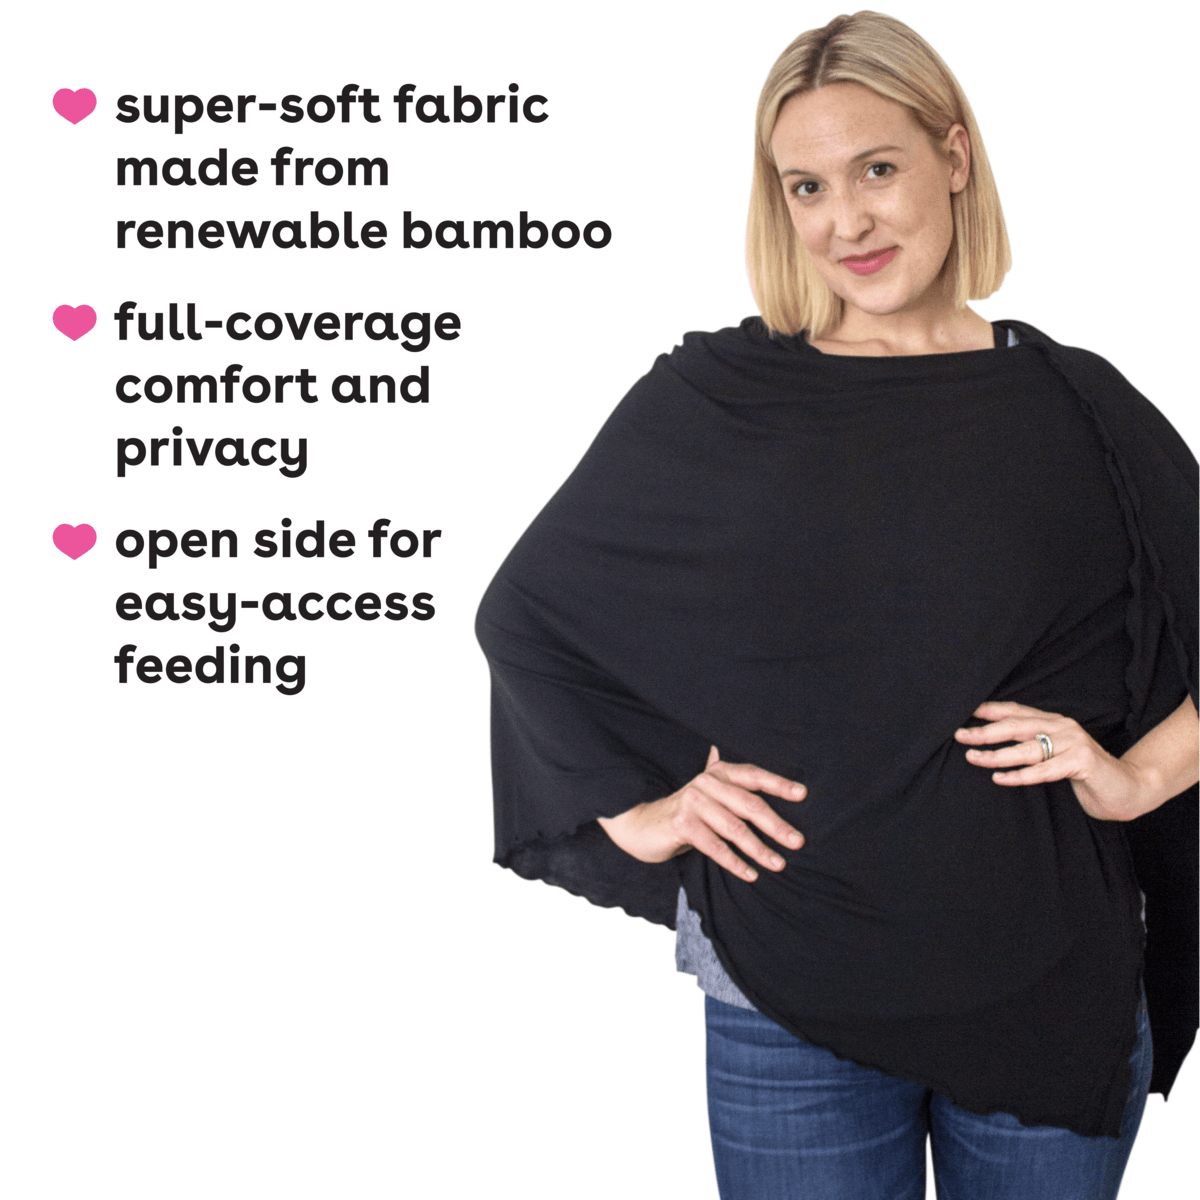 Infograph of woman wearing black nursing cover made of super-soft fabric made from renewable bamboo